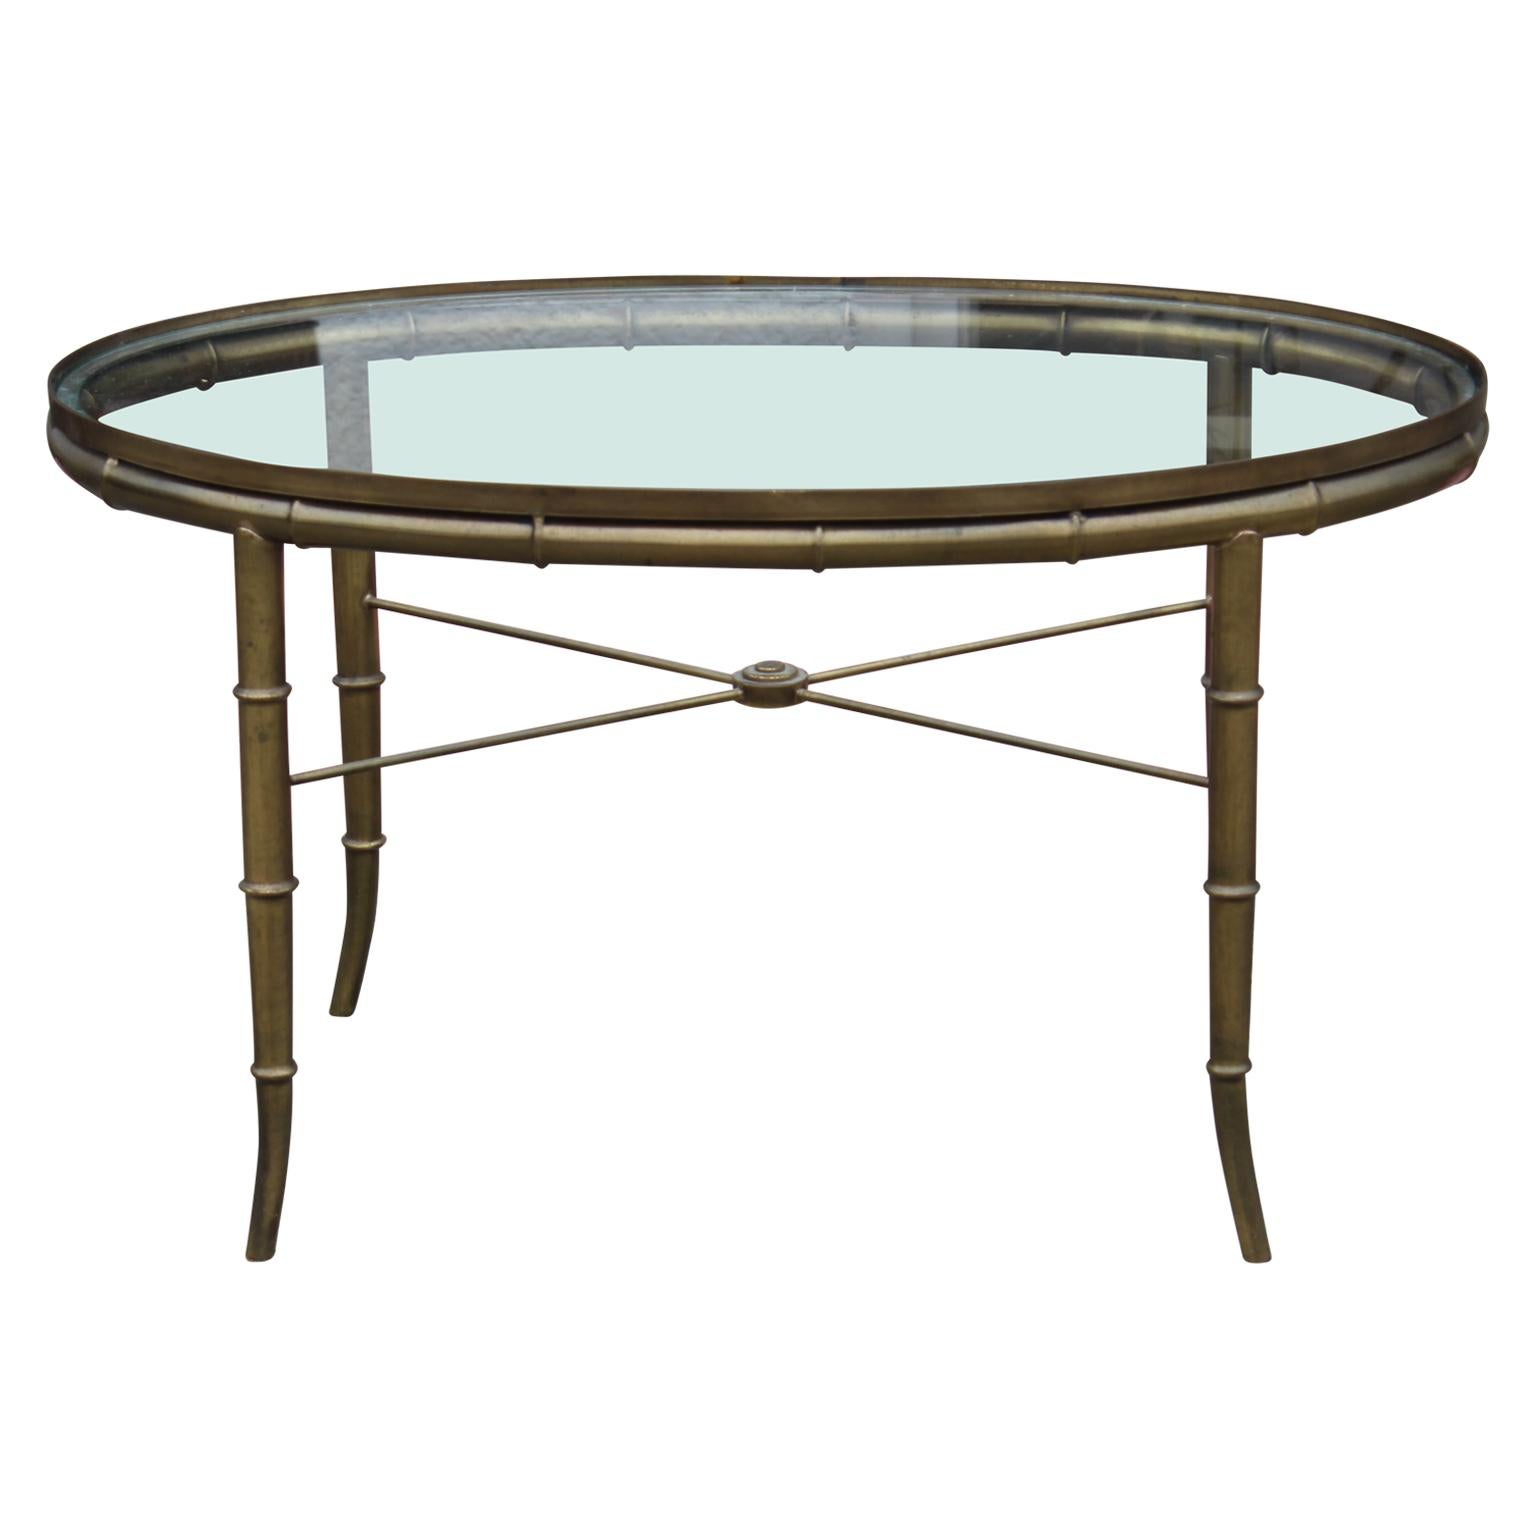 Hollywood Regency / French style Italian brass and glass oval coffee table with faux bamboo brass legs.